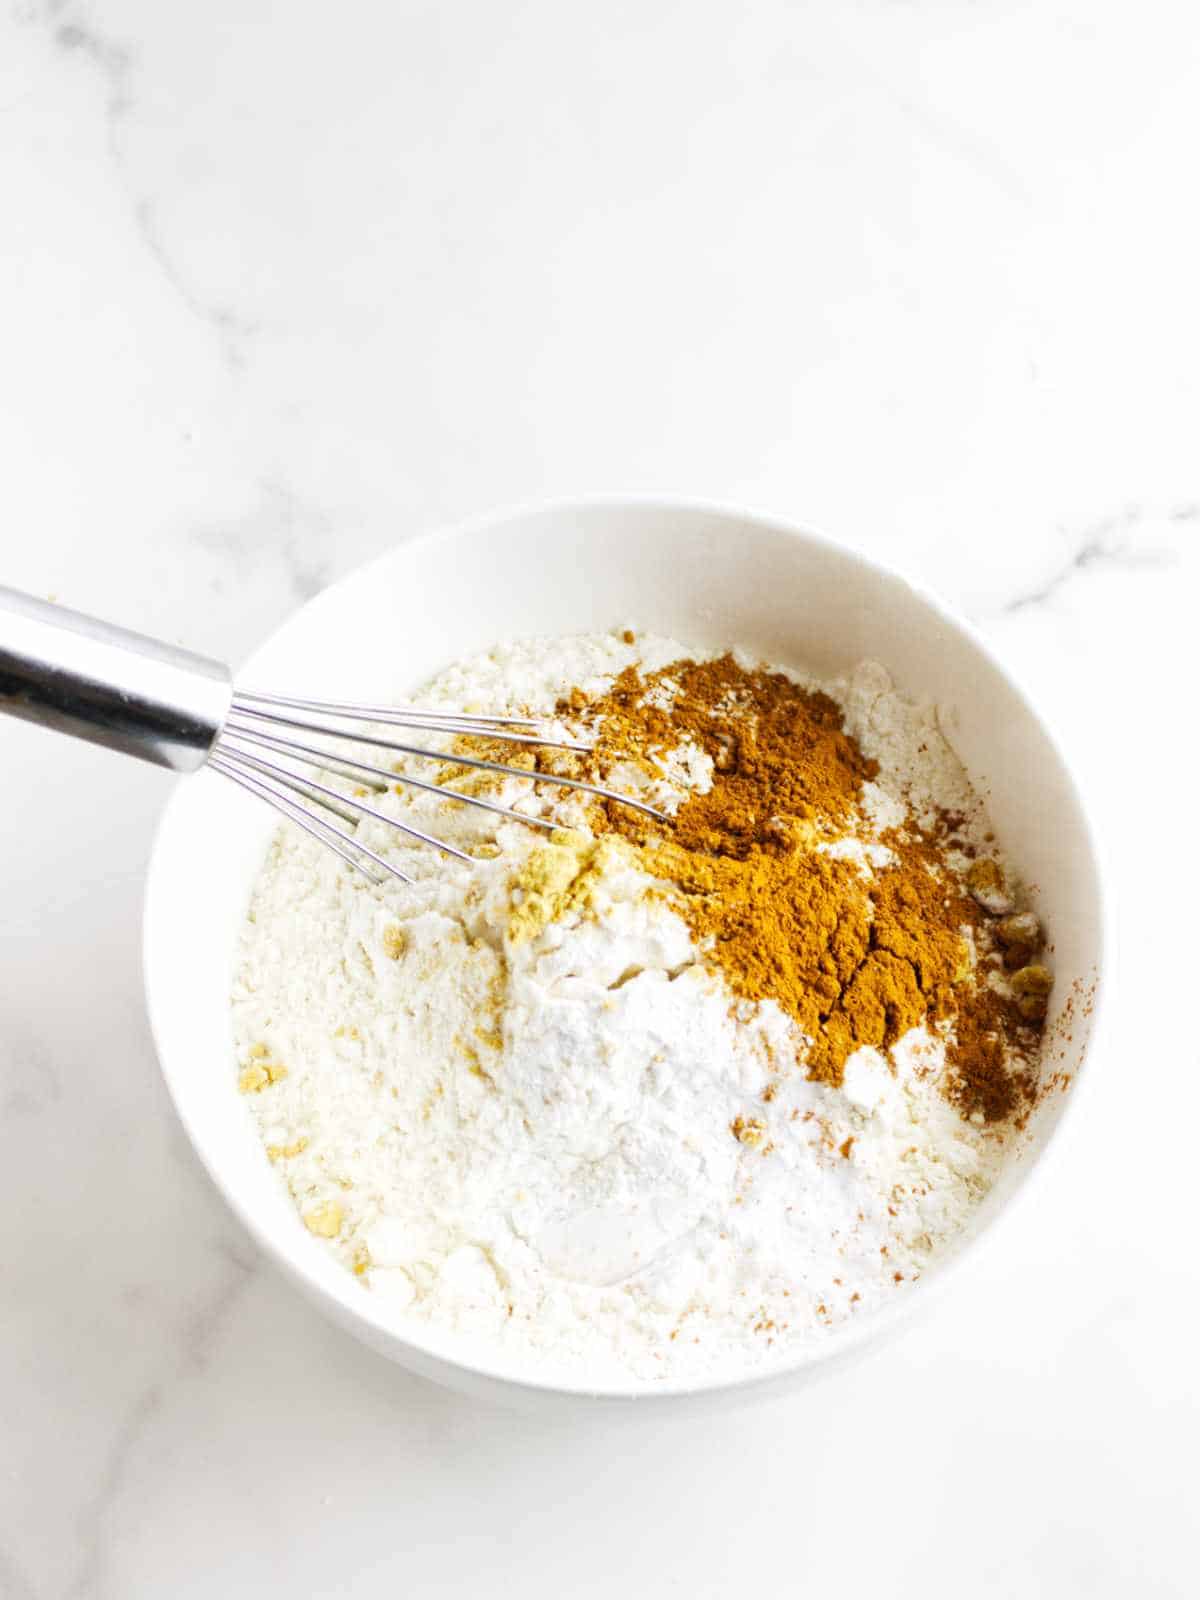 flour, spices, salt, and baking powder in a bowl with a whisk.